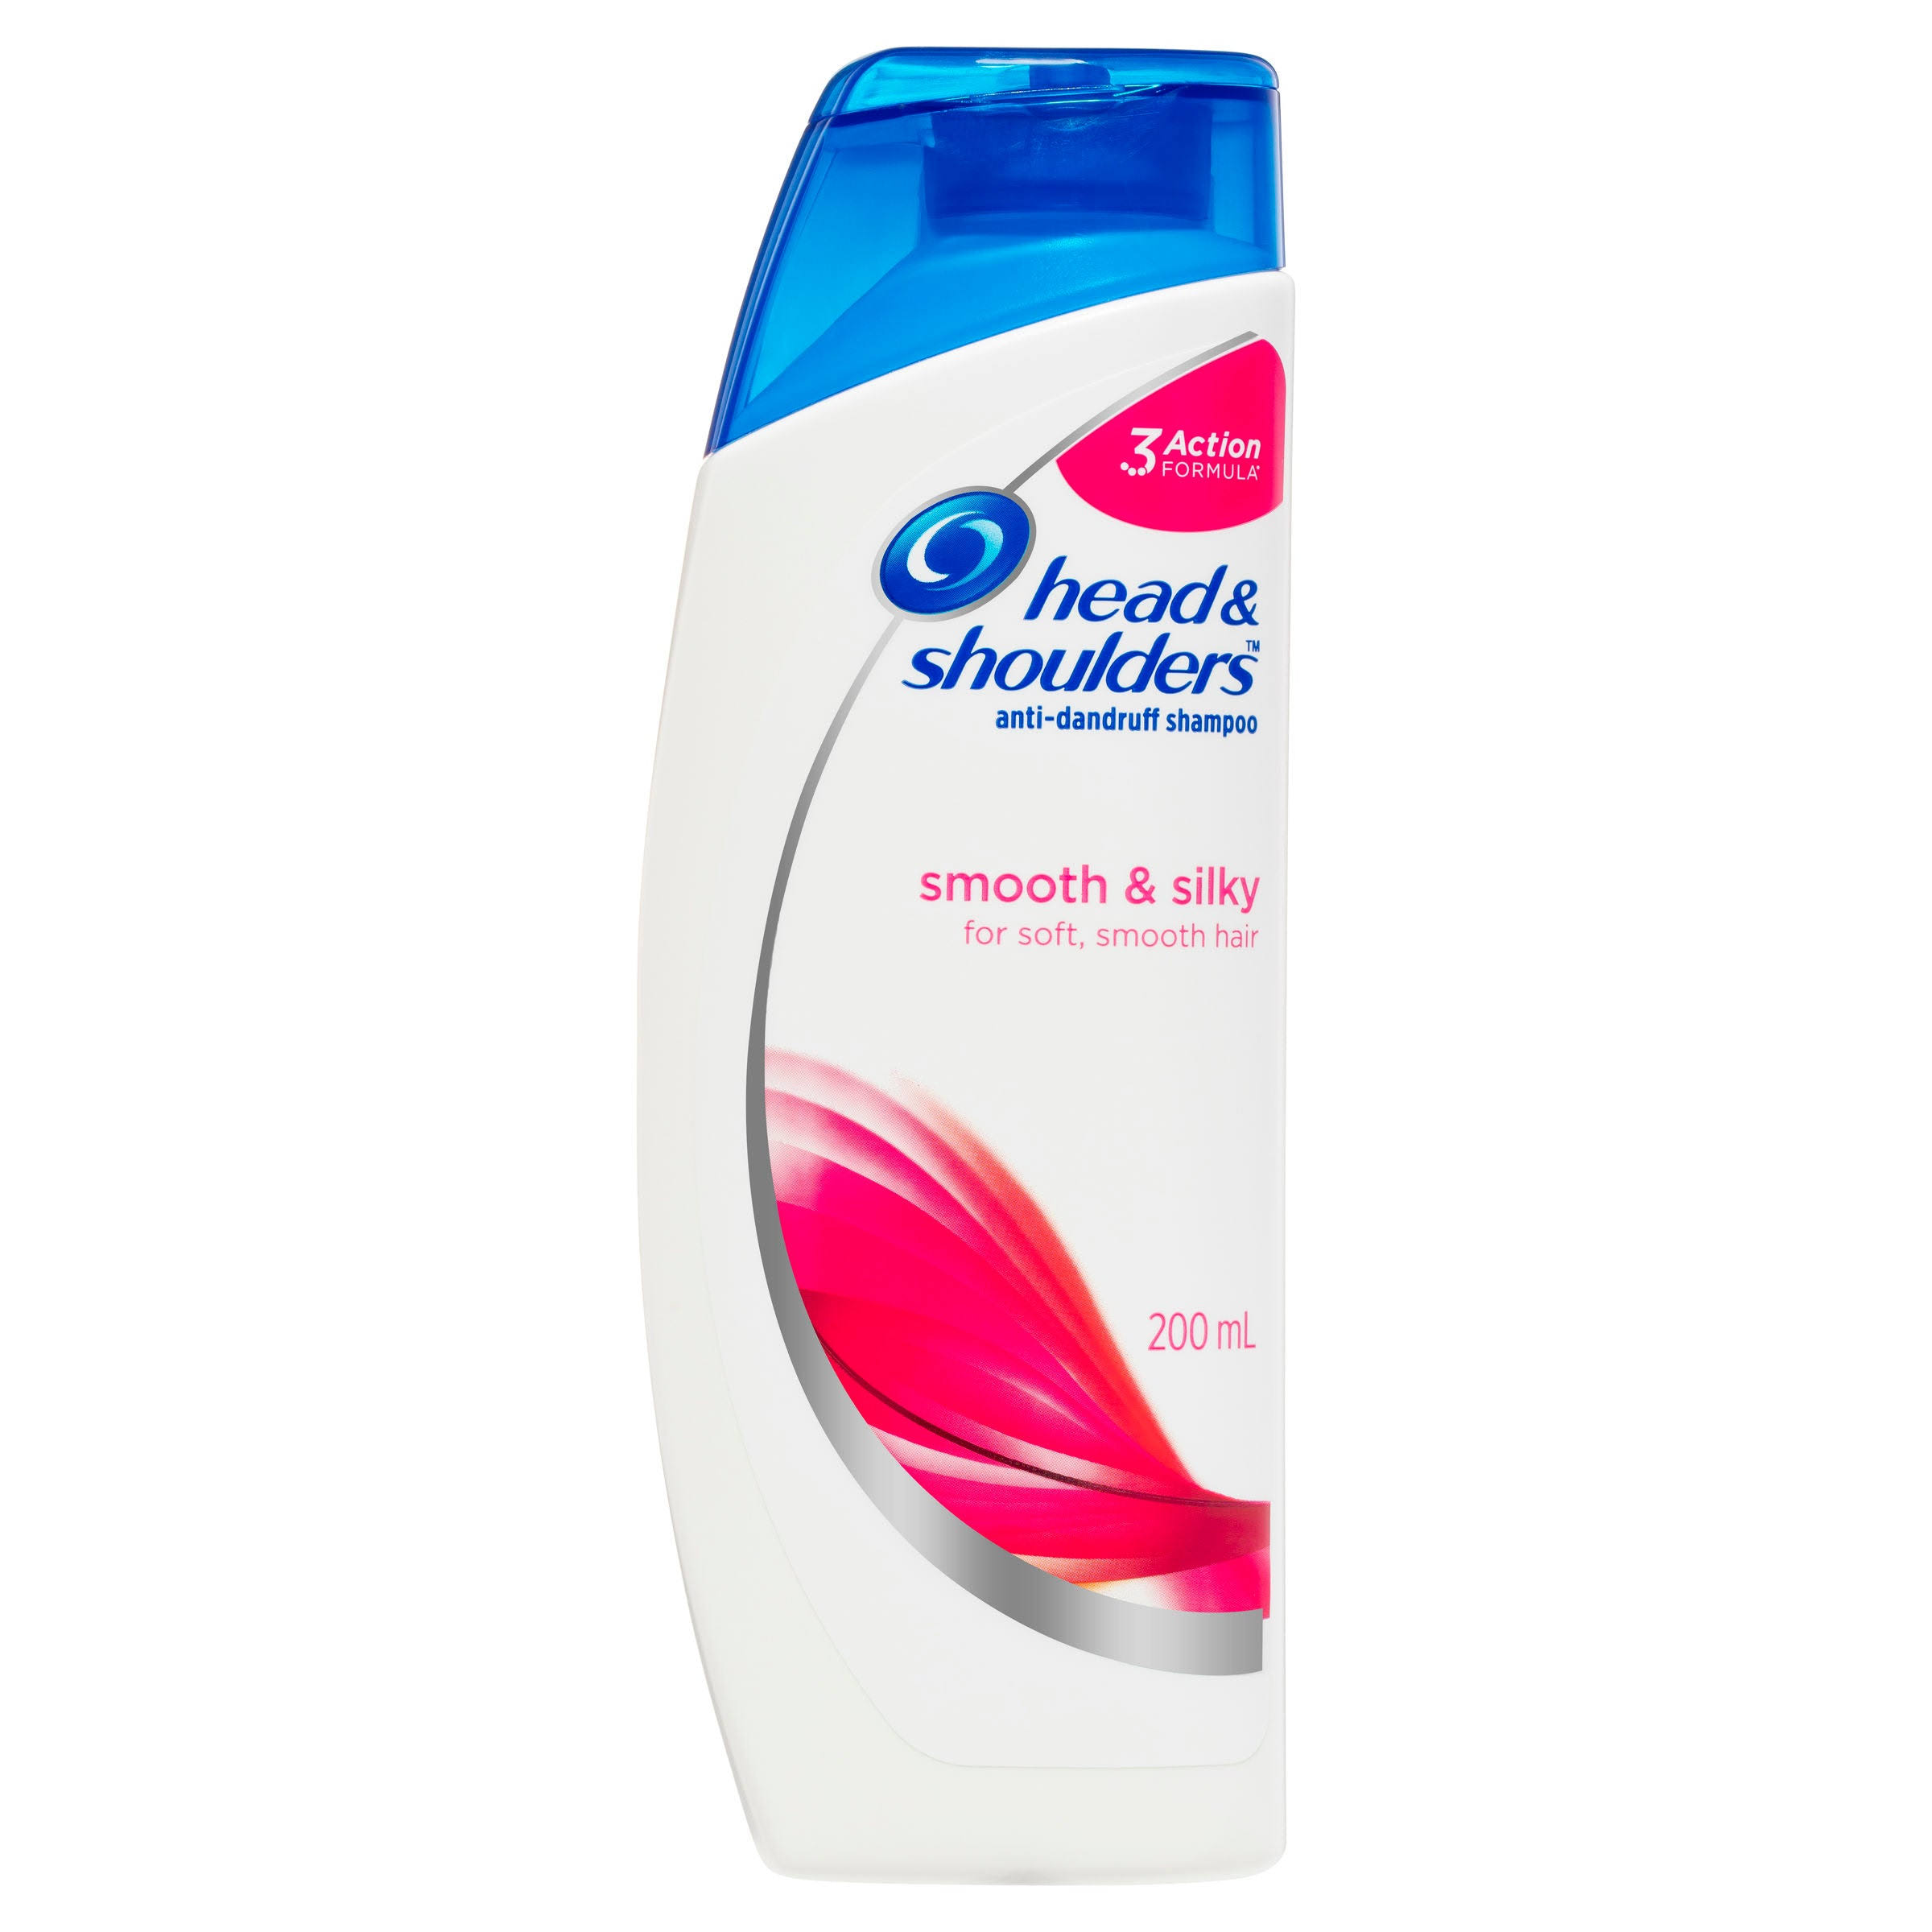 Head & Shoulders Smooth and Silky Shampoo - 200ml